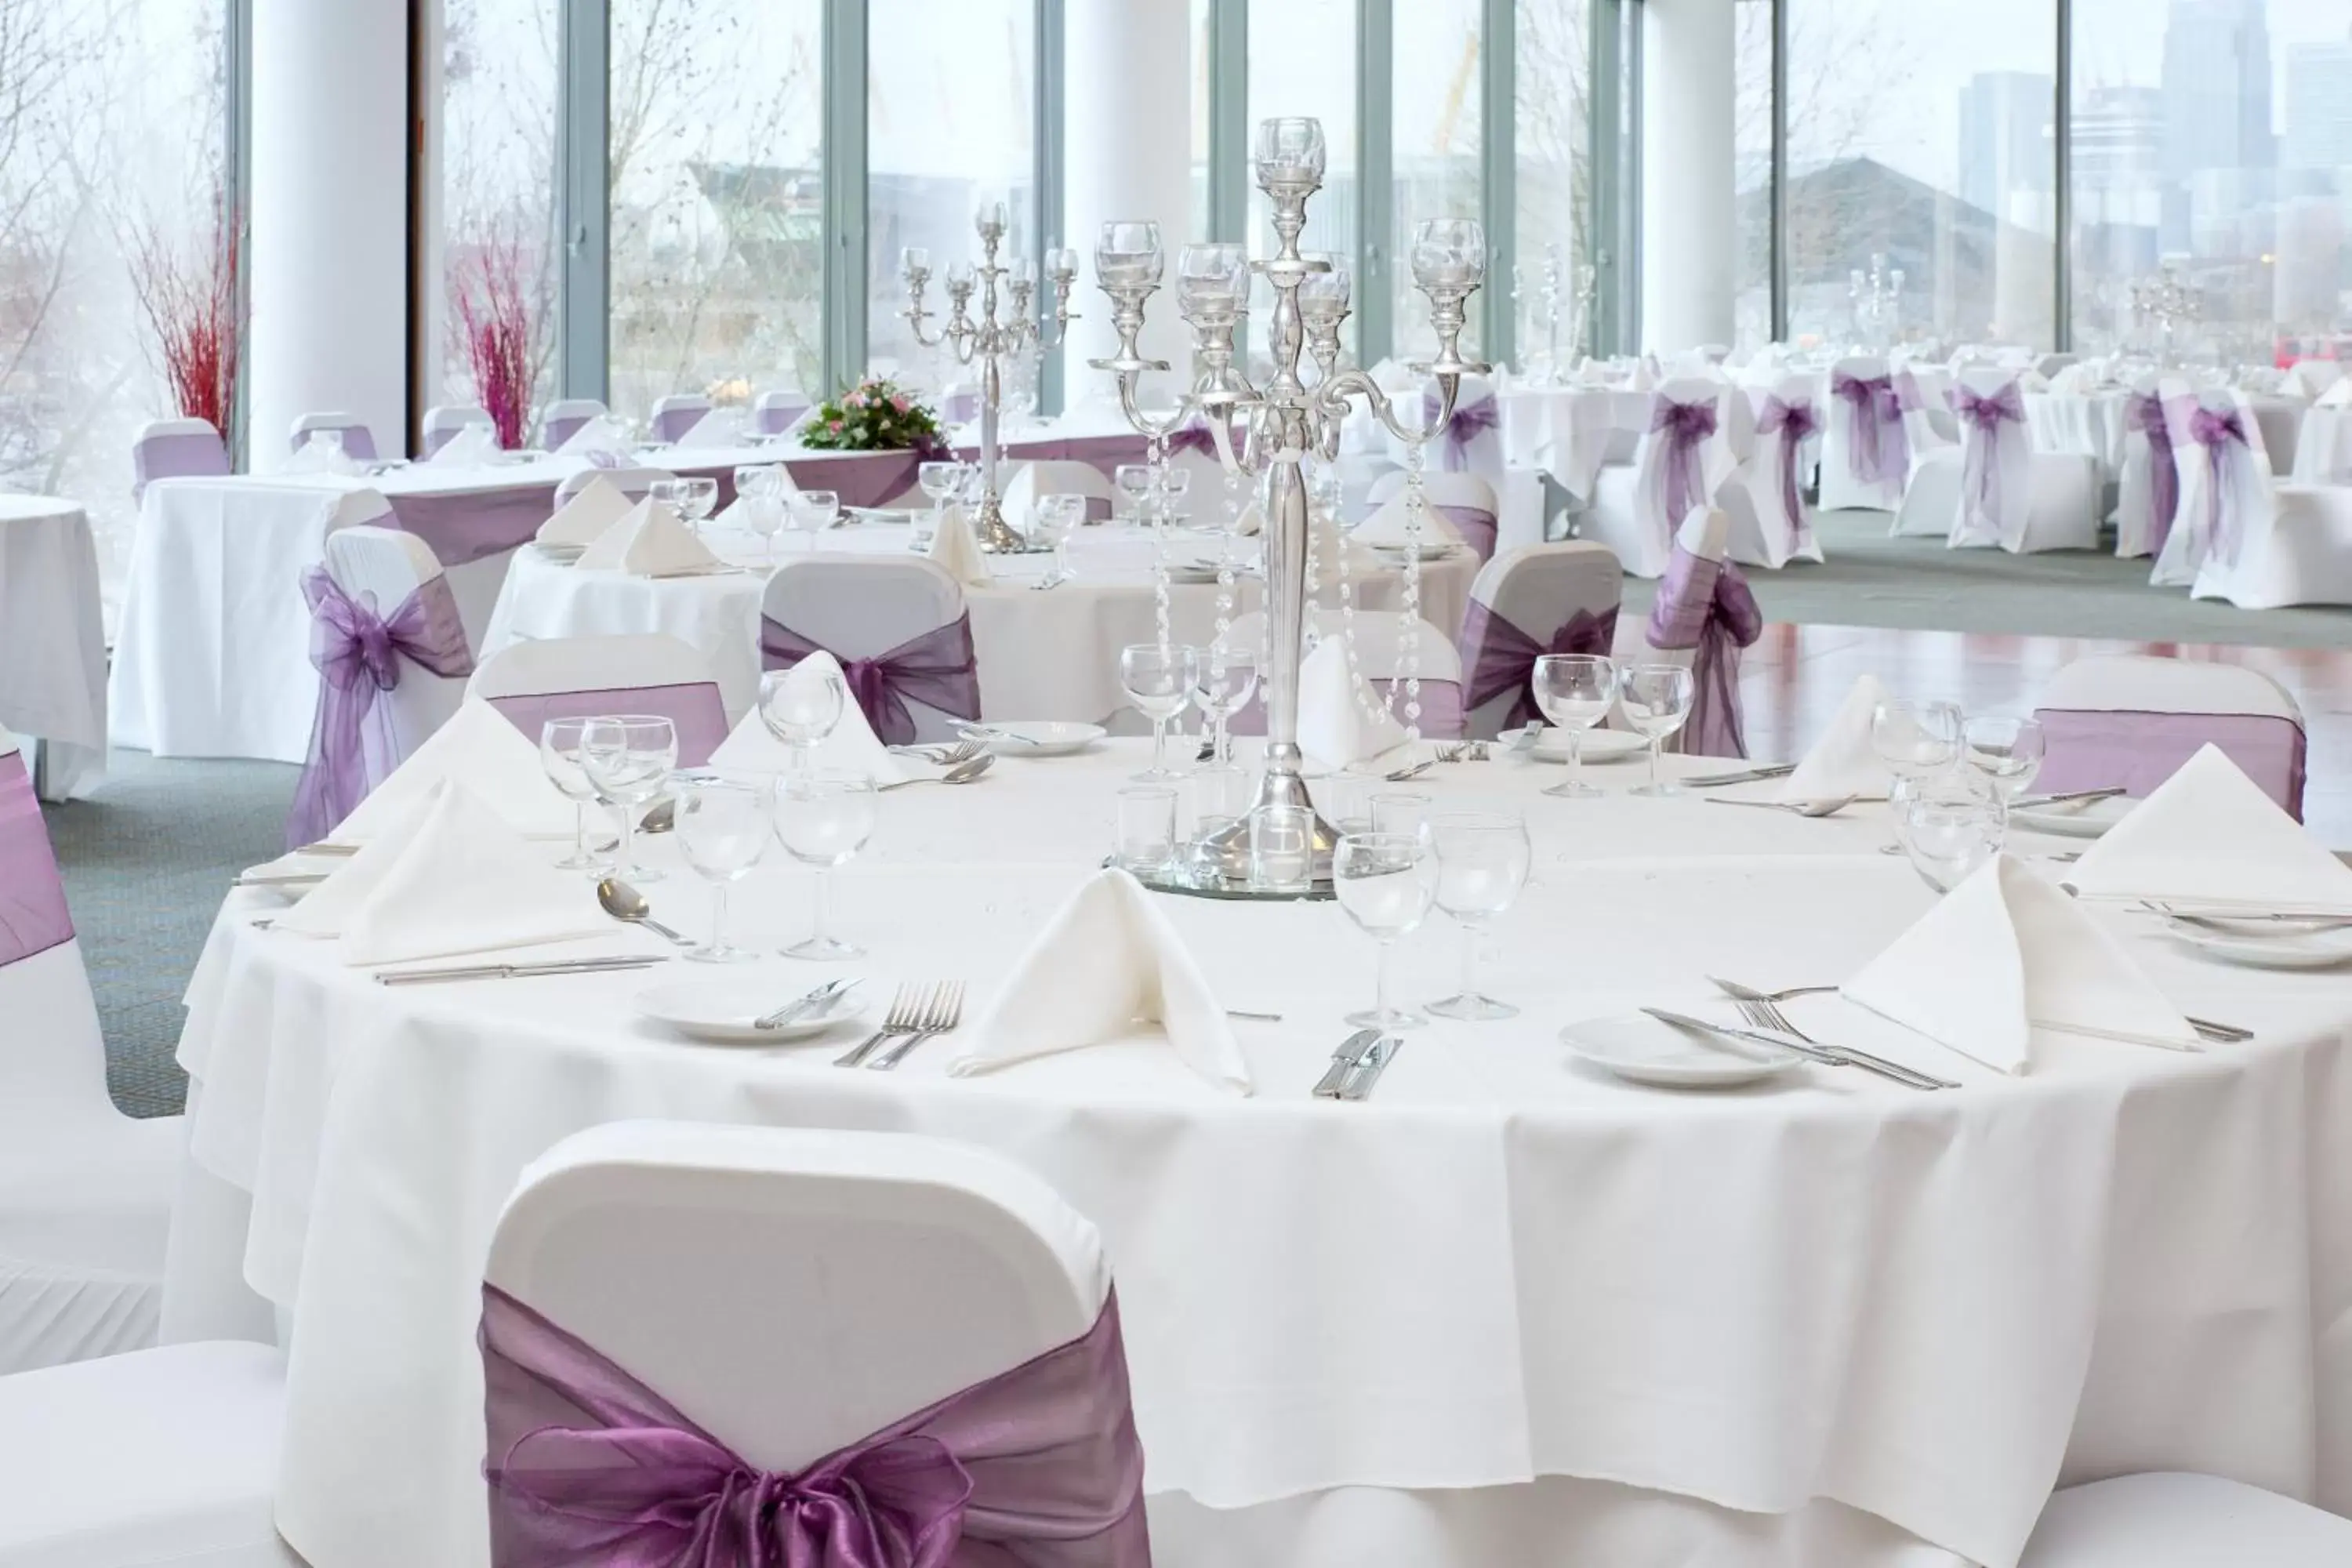 Banquet/Function facilities, Banquet Facilities in Crowne Plaza London - Docklands, an IHG Hotel